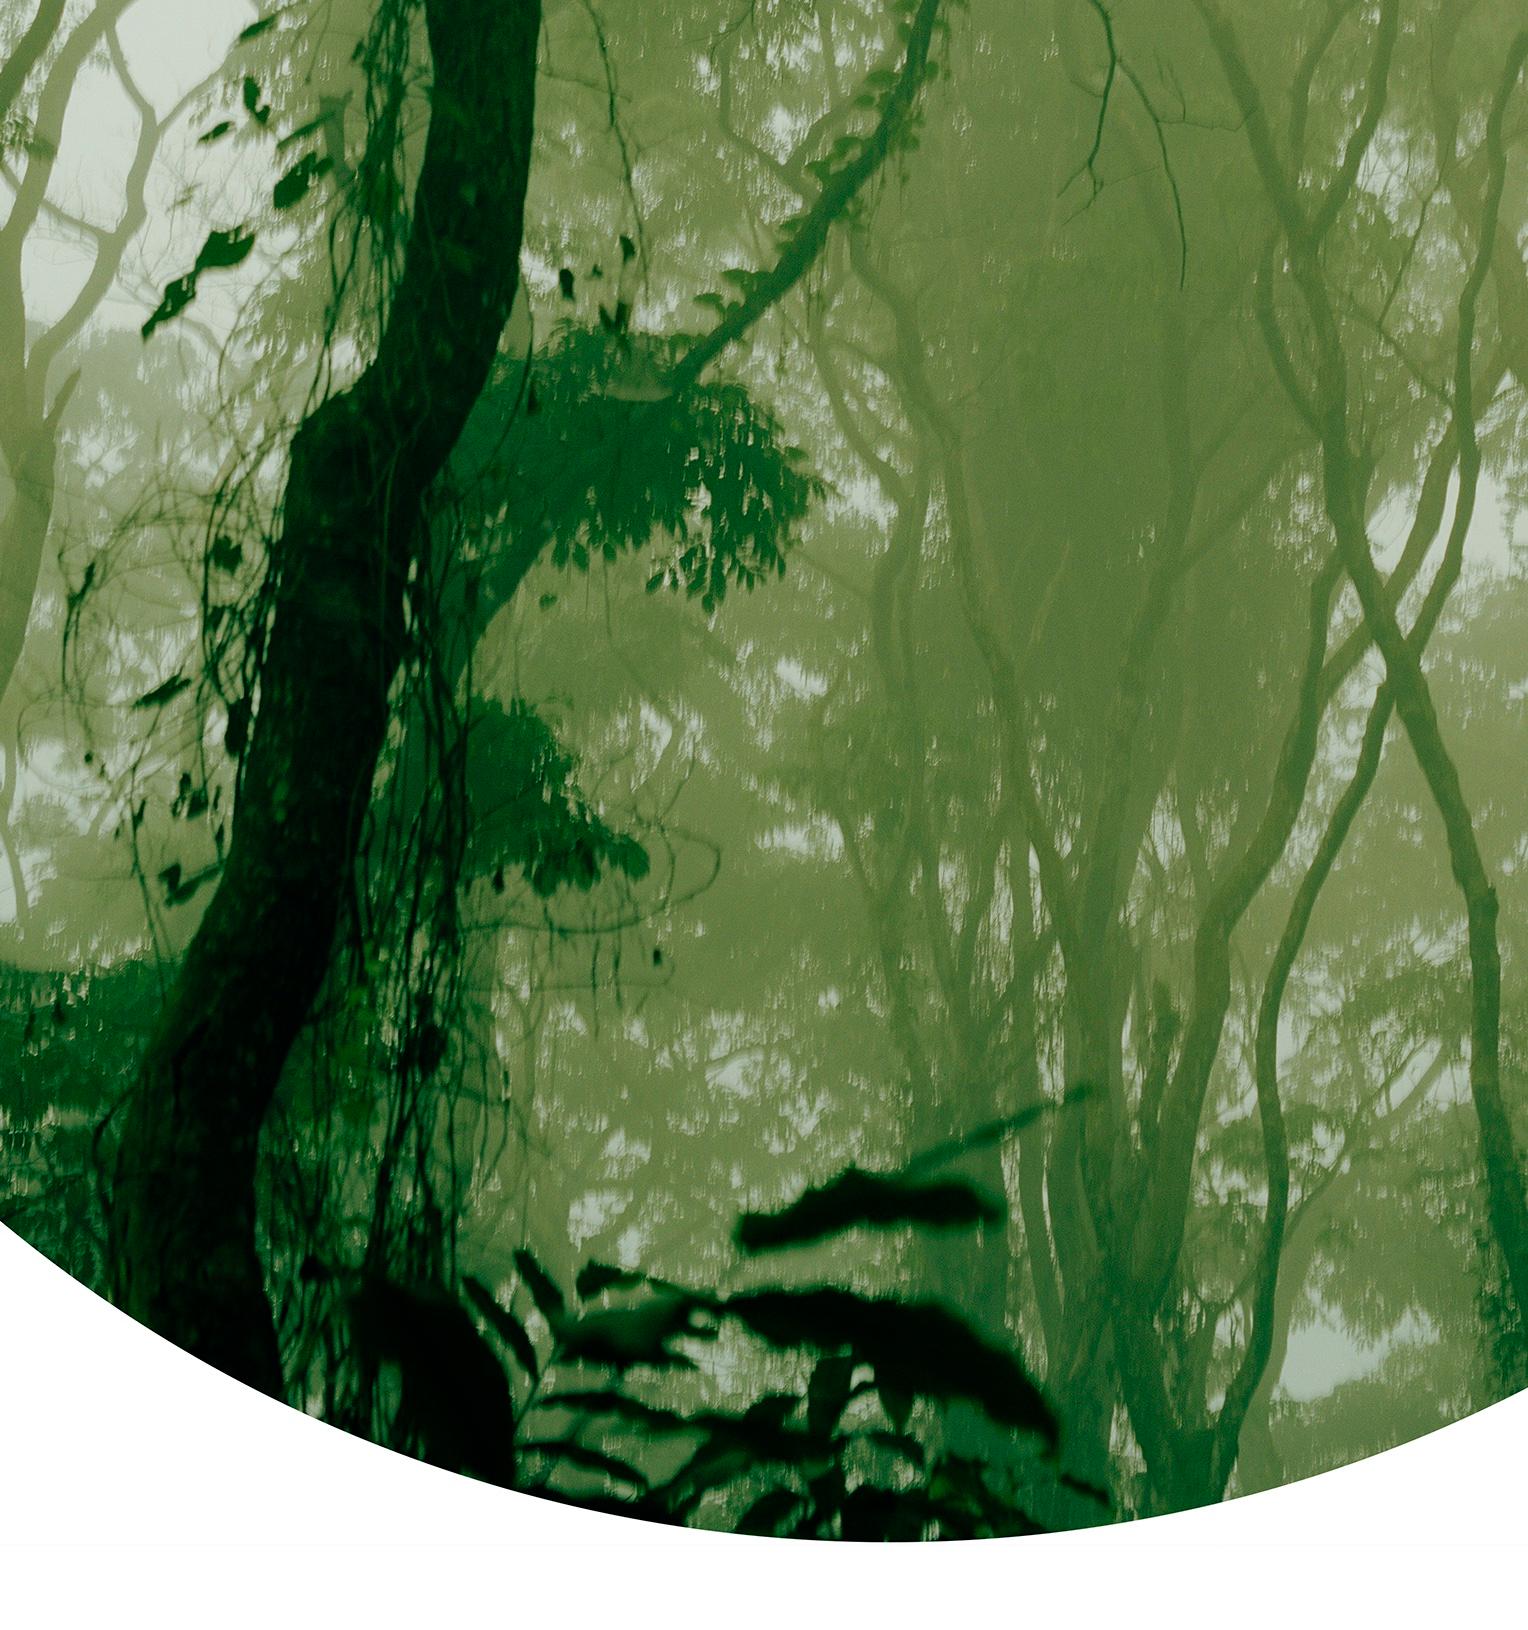 Verena Prenner
Into the Jungle - Contemporary Lush Landscape Photography
Edition 2/5+II AP
Fine Art Baryta Print mounted on dibond, Diasec
Numbered and signed by the artist

In October 2018, Verena Prenner received a cigar box from a friend that he